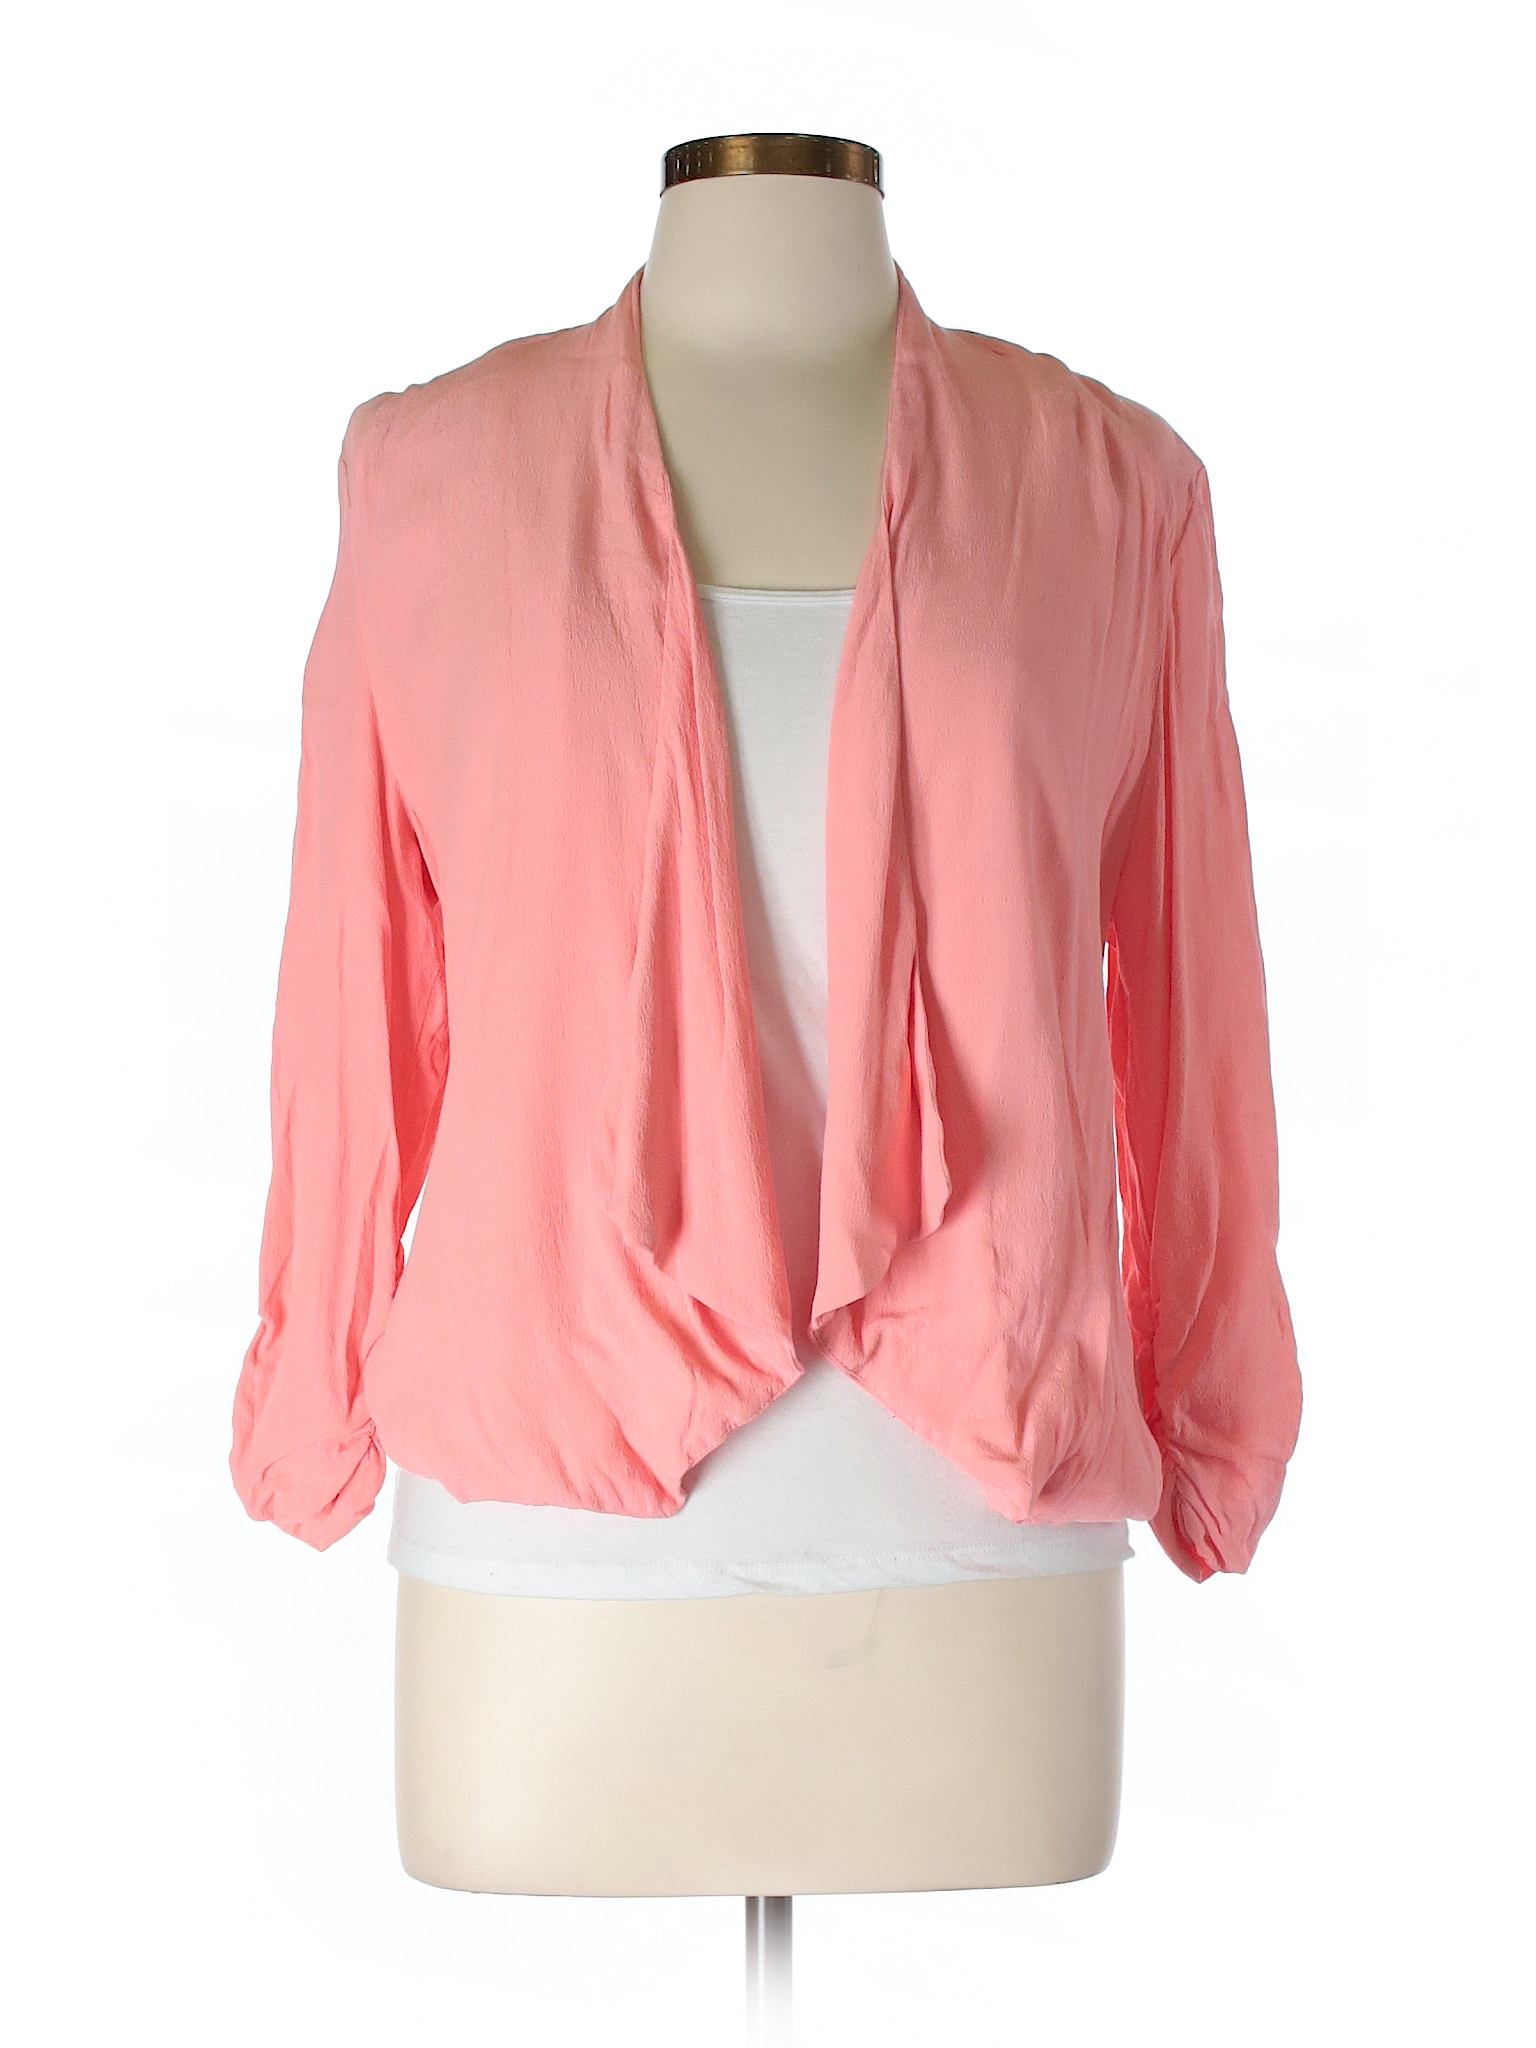 Maurices 100% Rayon Solid Coral Jacket Size L - 73% off | thredUP